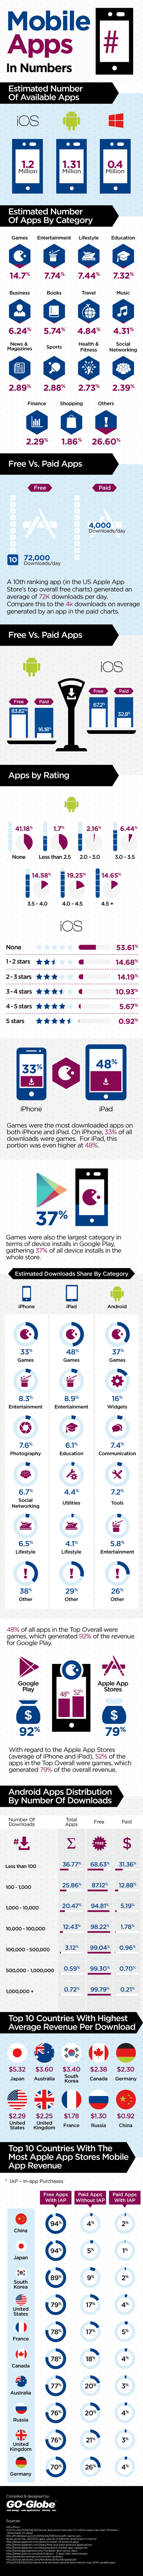 Mobile Apps In Numbers 